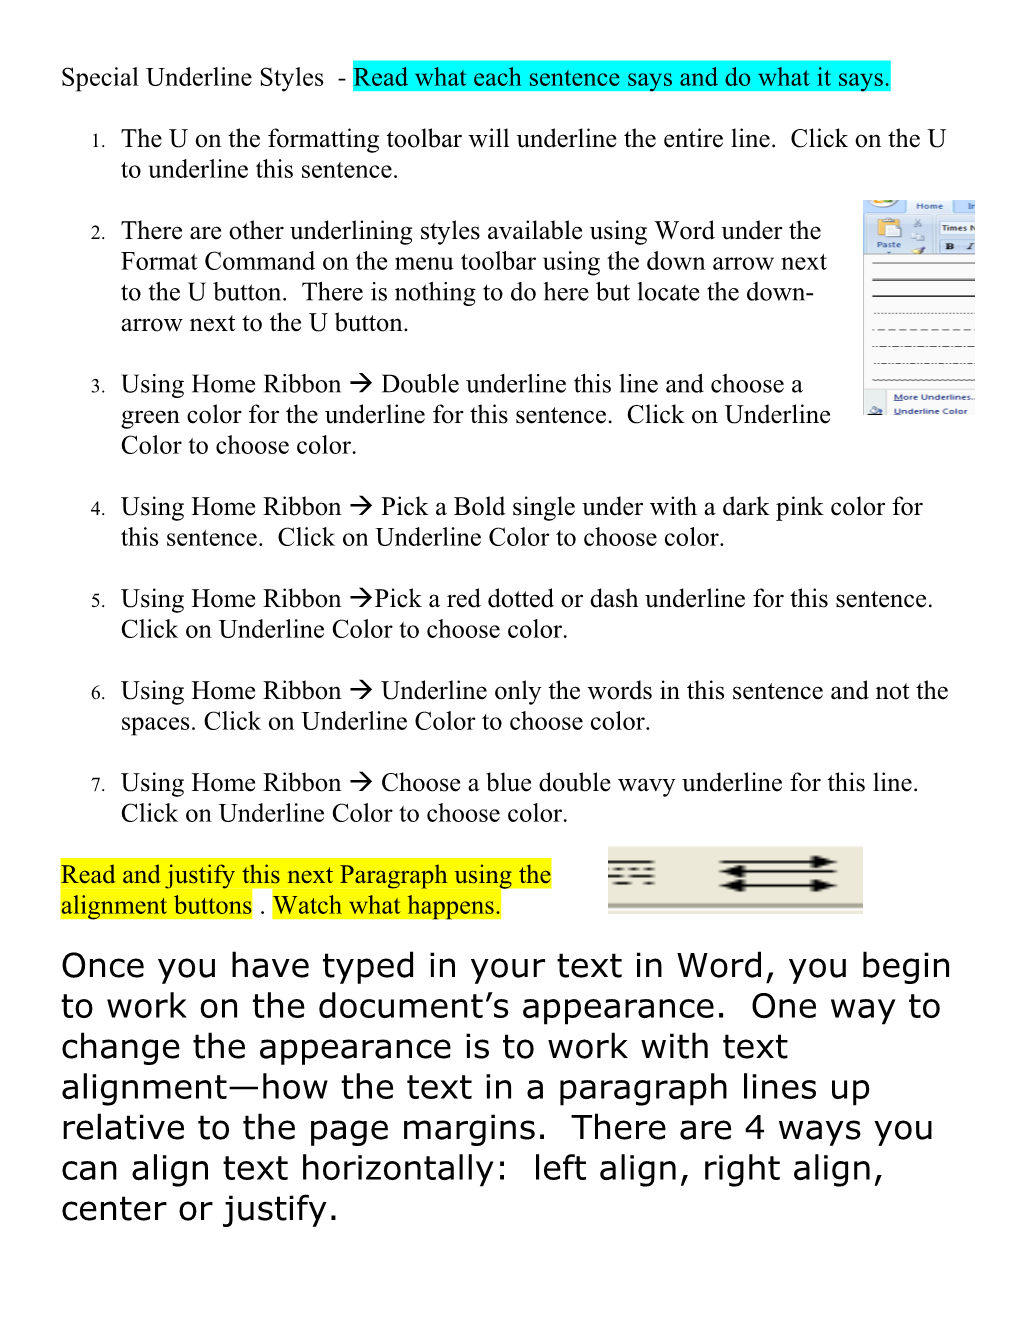 Once You Have Typed In Your Text In Word, You Begin To Work On The Document’S Appearance